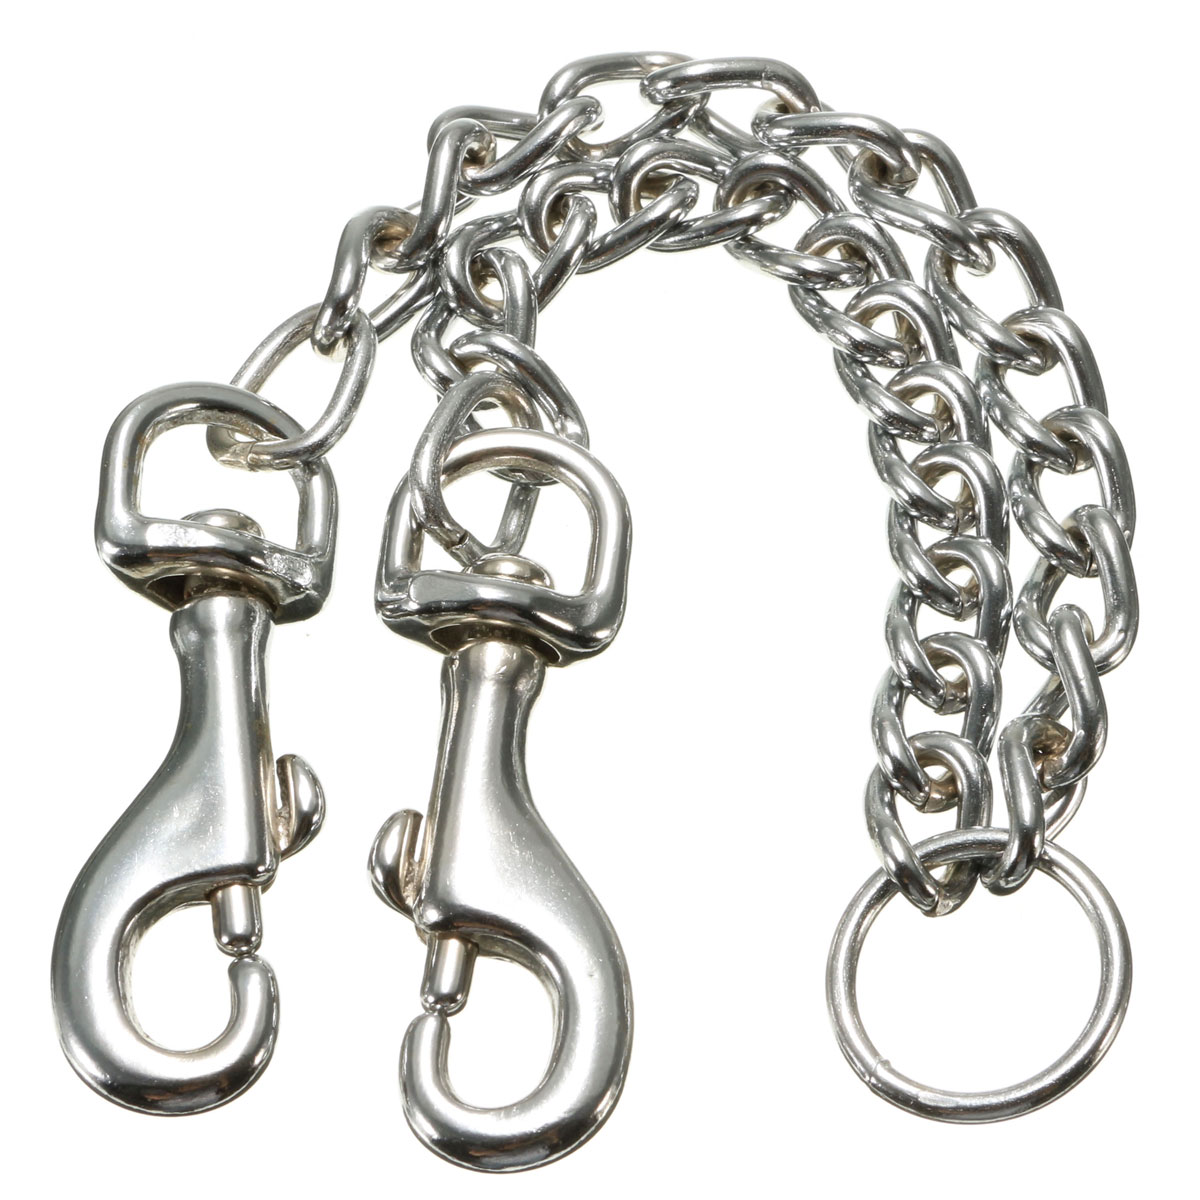 Stainless-Double-Headed-Dog-Traction-Rope-Pet-Coupler-Twin-Lead-Bite-Resistant-Pet-Chain-1333618